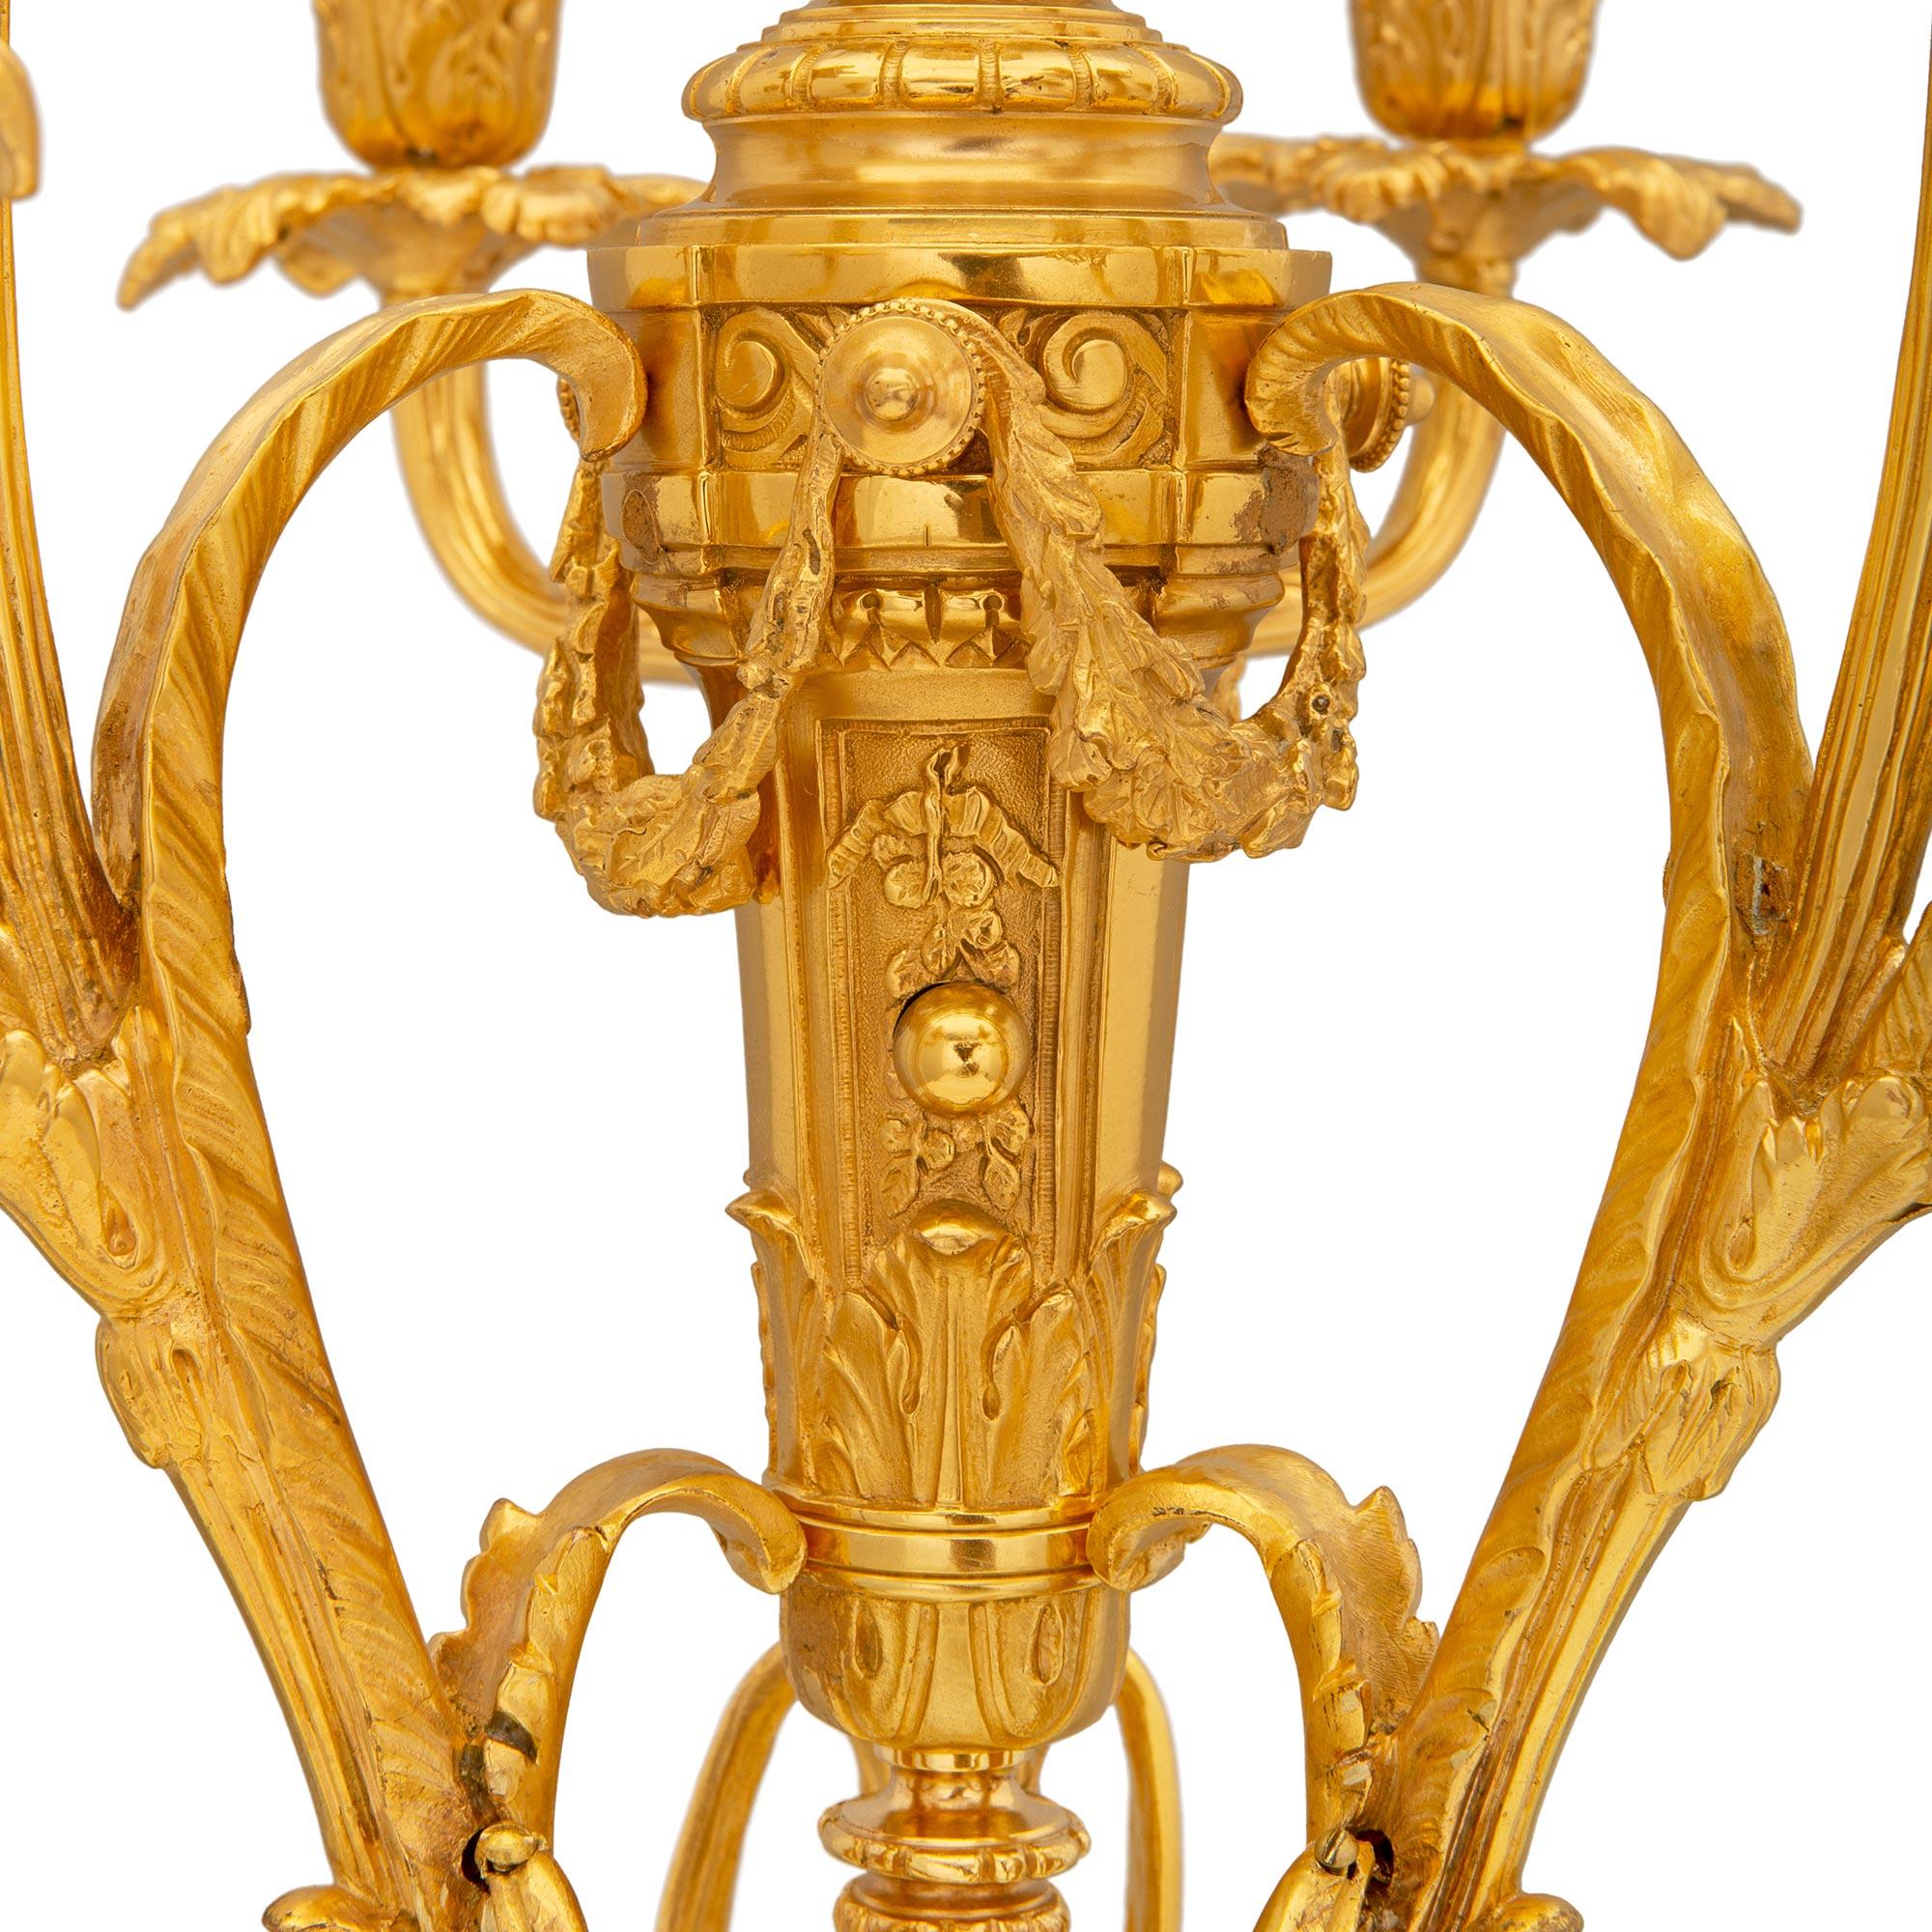 Pair Of French 19th Century Belle Époque Period Ormolu And Marble Candelabras In Good Condition For Sale In West Palm Beach, FL